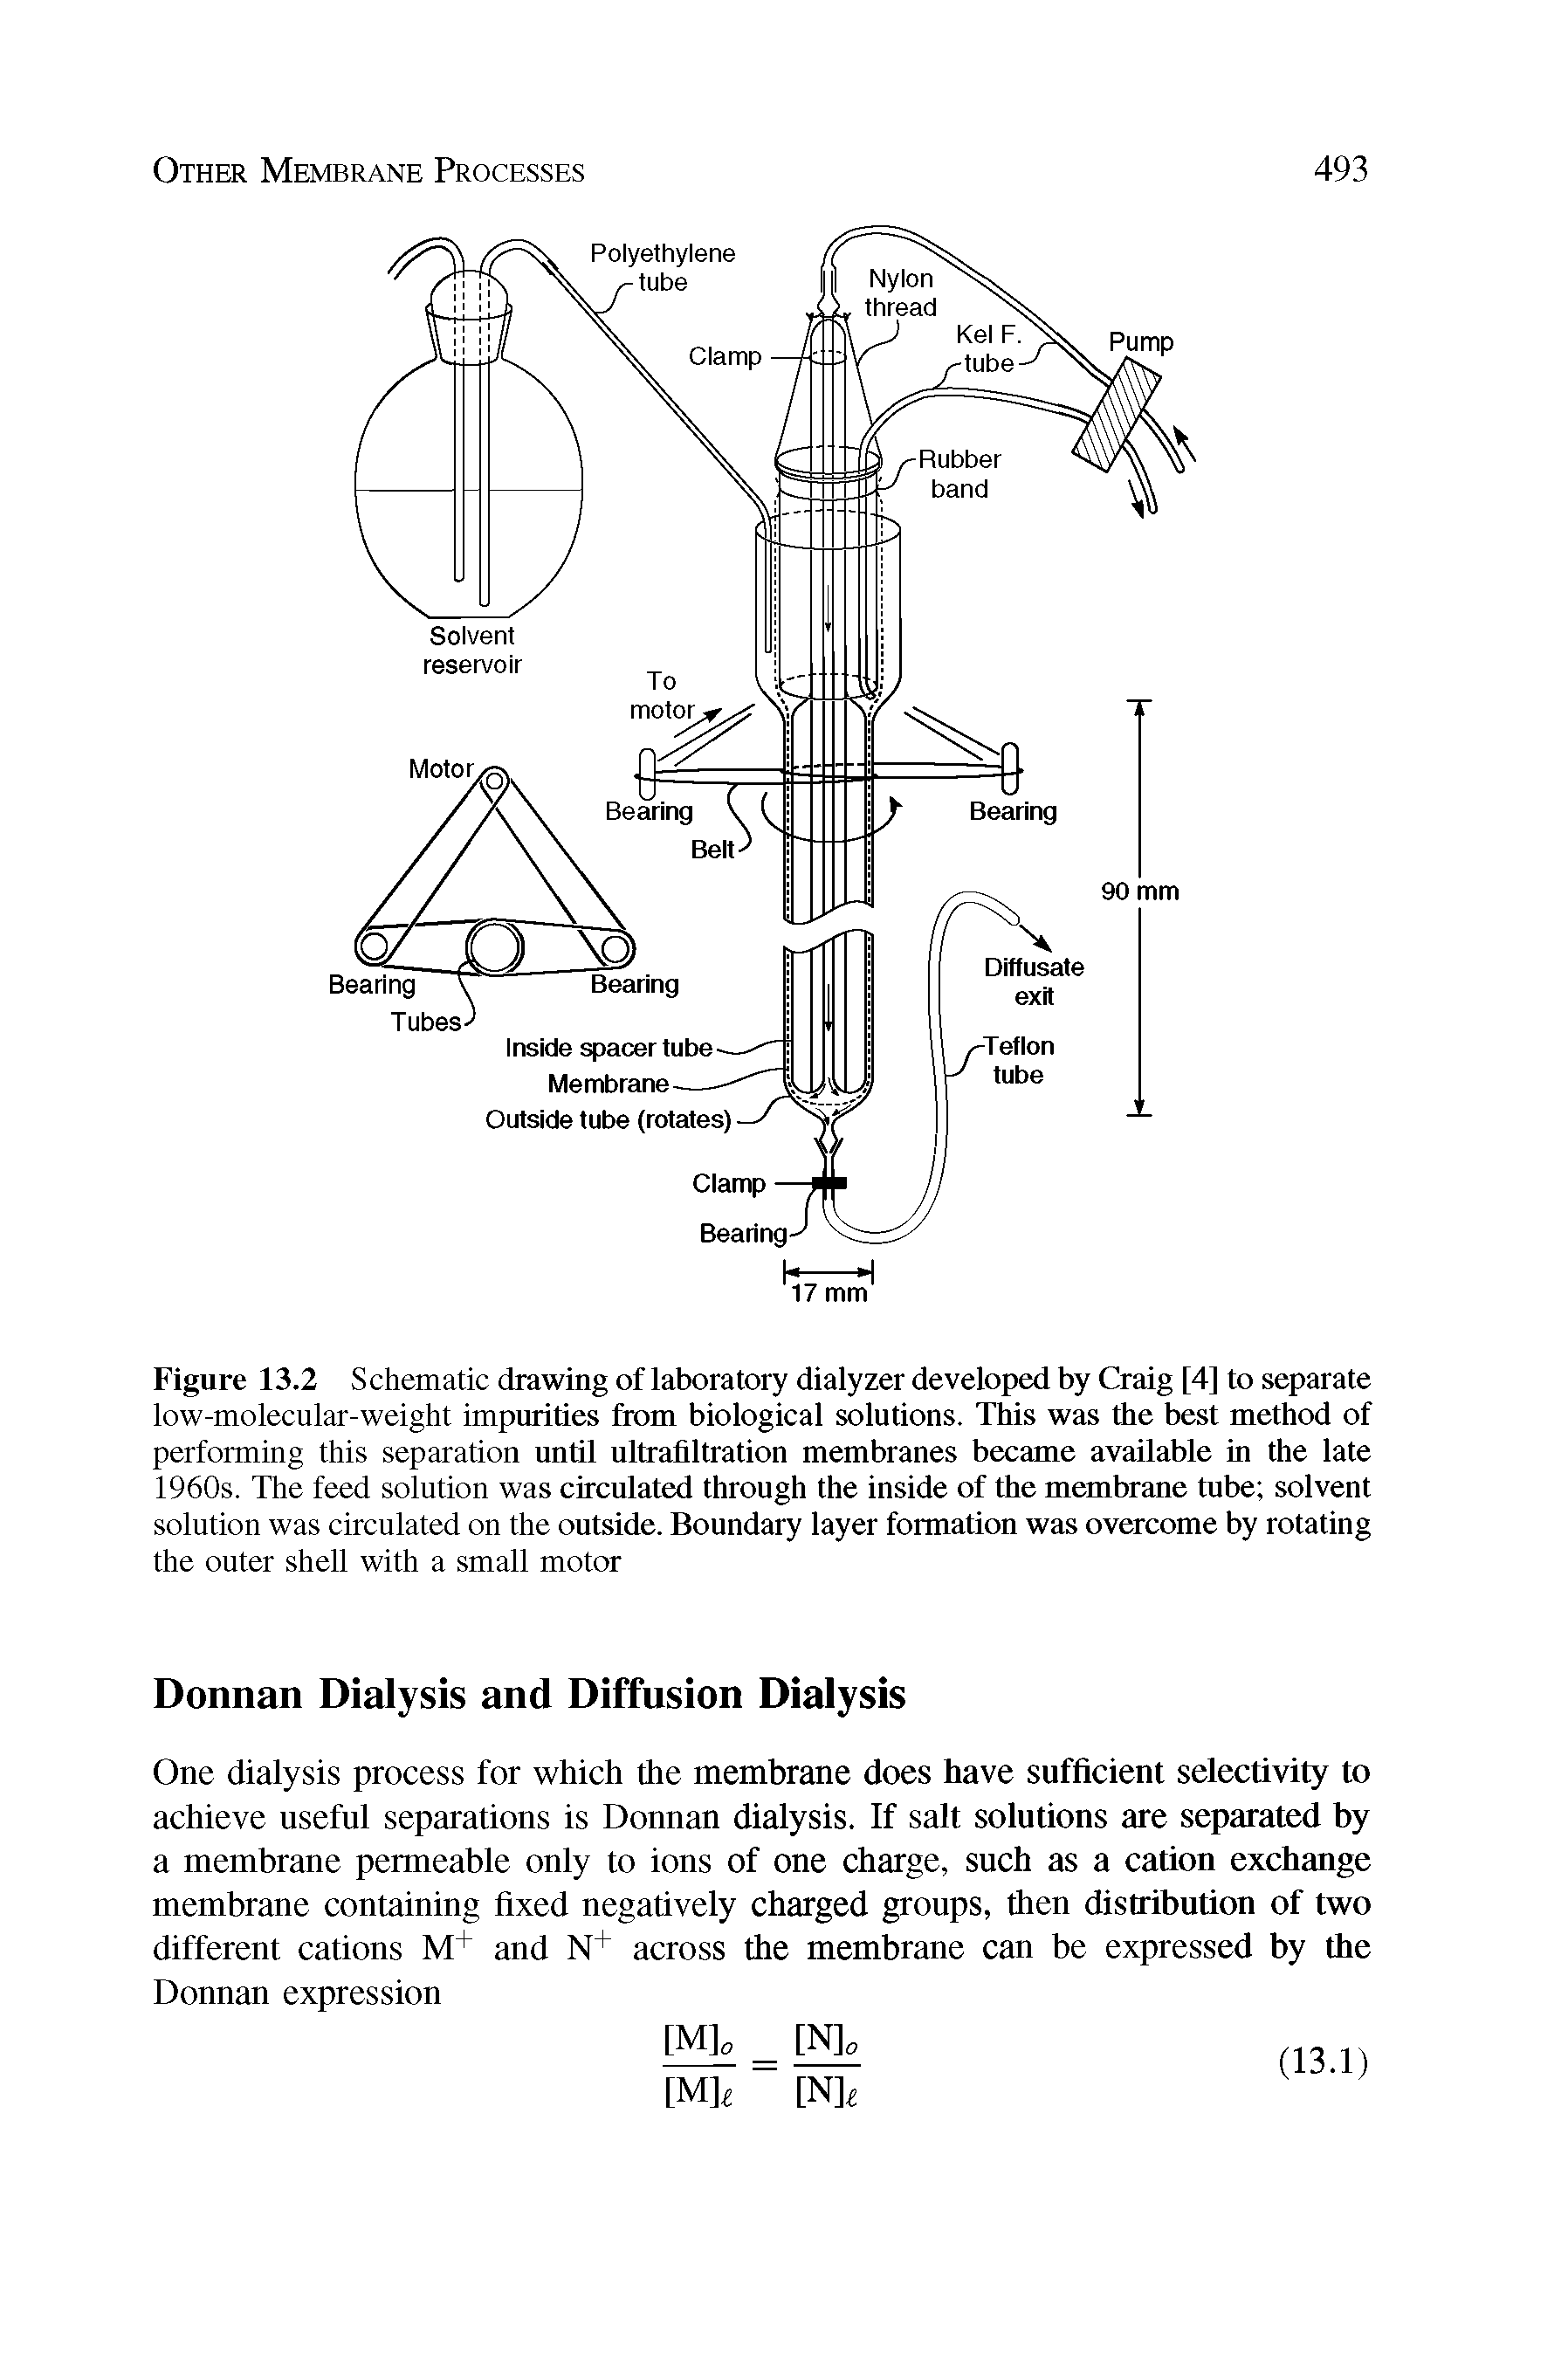 Figure 13.2 Schematic drawing of laboratory dialyzer developed by Craig [4] to separate low-molecular-weight impurities from biological solutions. This was the best method of performing this separation until ultrafiltration membranes became available in the late 1960s. The feed solution was circulated through the inside of the membrane tube solvent solution was circulated on the outside. Boundary layer formation was overcome by rotating the outer shell with a small motor...